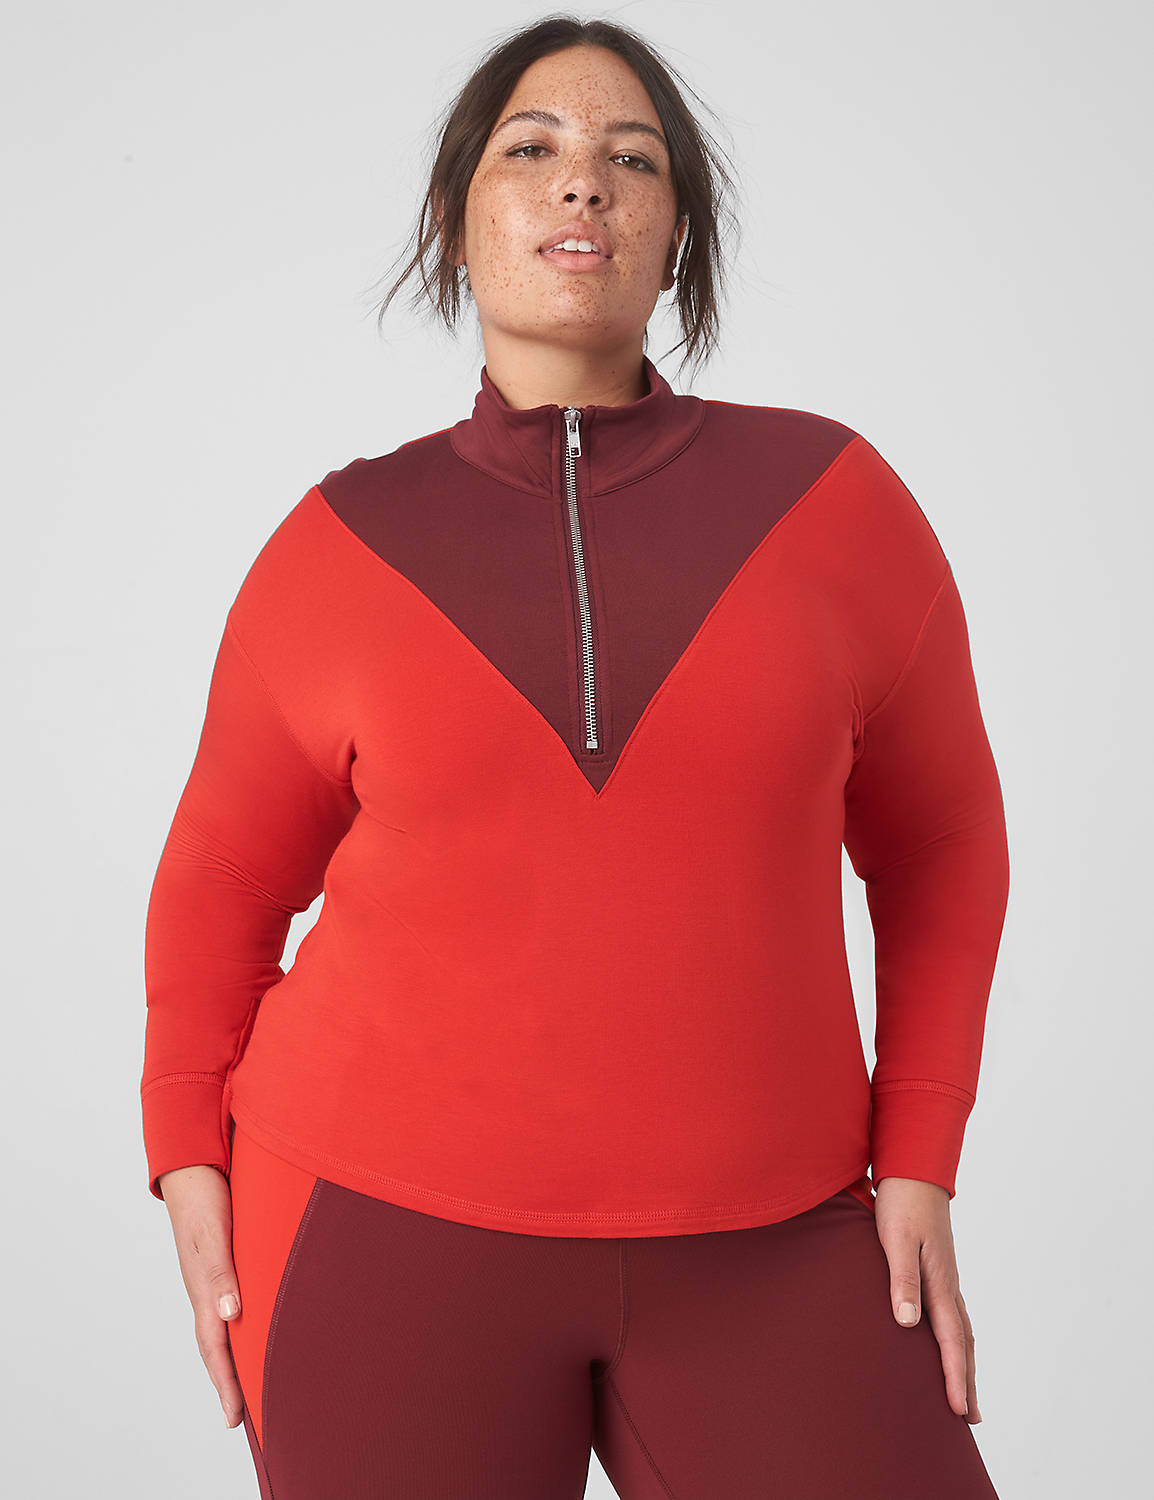 Long Sleeve Half Zip Cozy Soft Colo Product Image 1